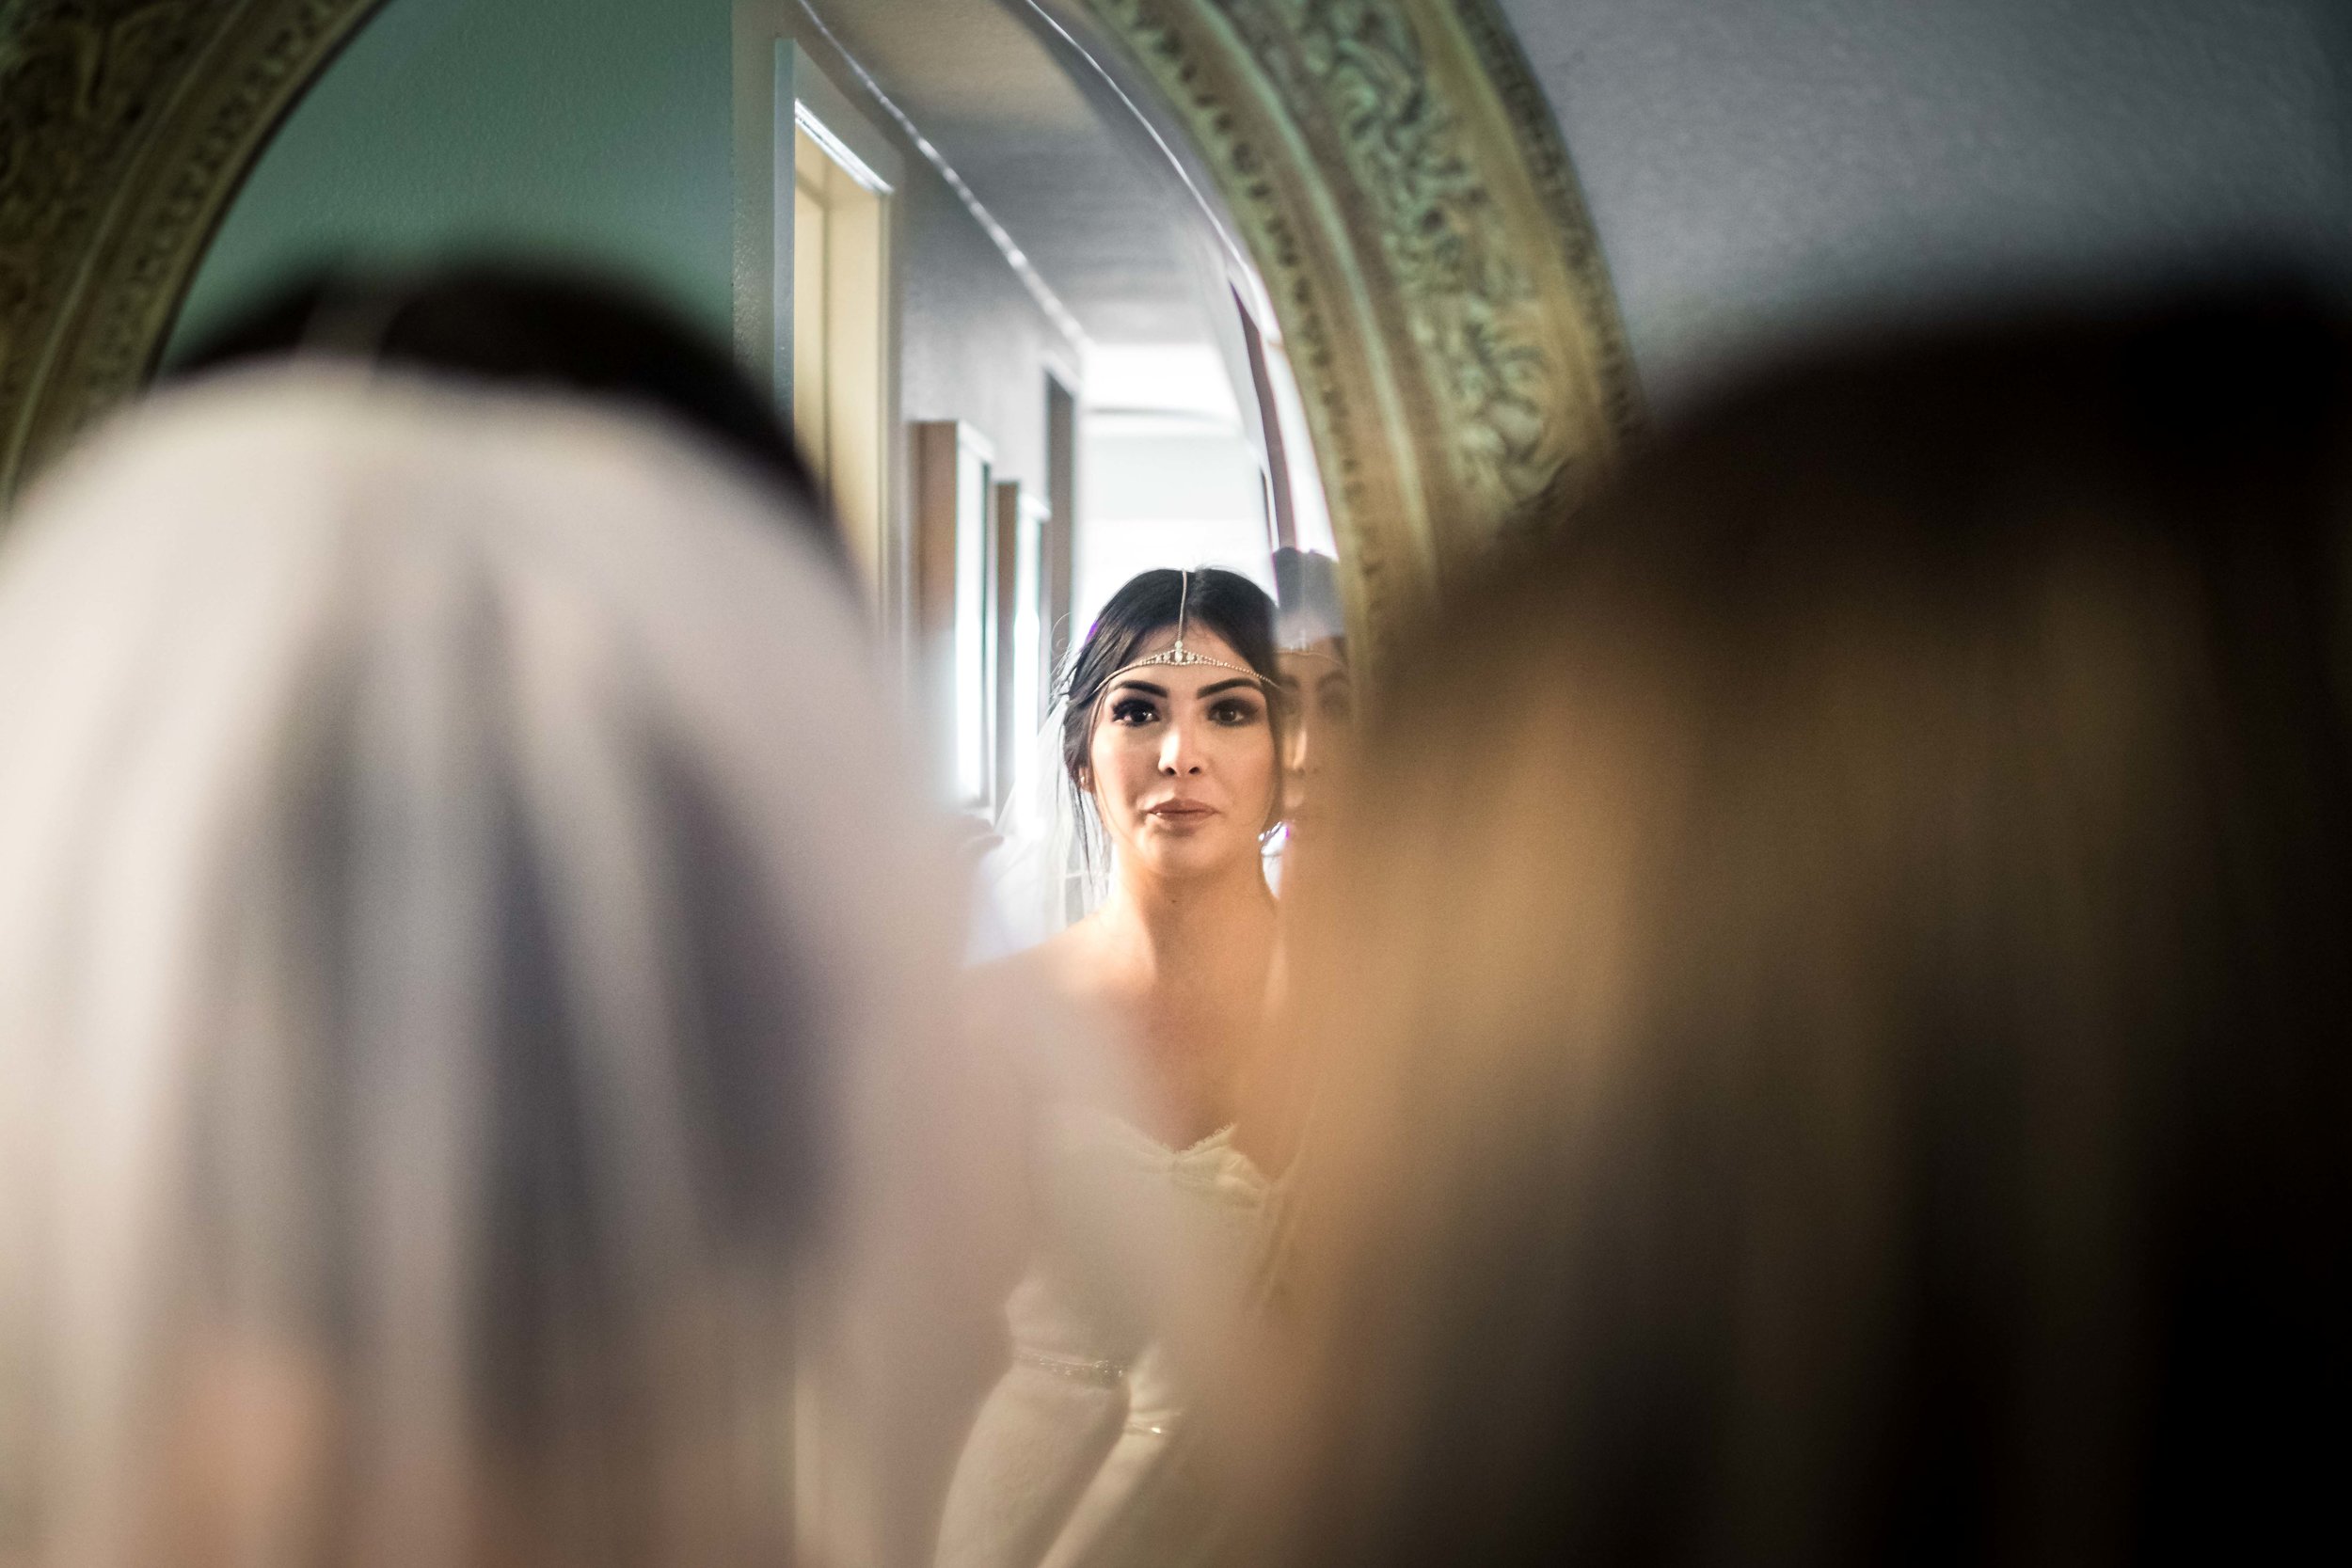 Candid wedding Photo taken of the bride with her mother looking in the mirror while she's getting ready before her wedding on Balboa Island